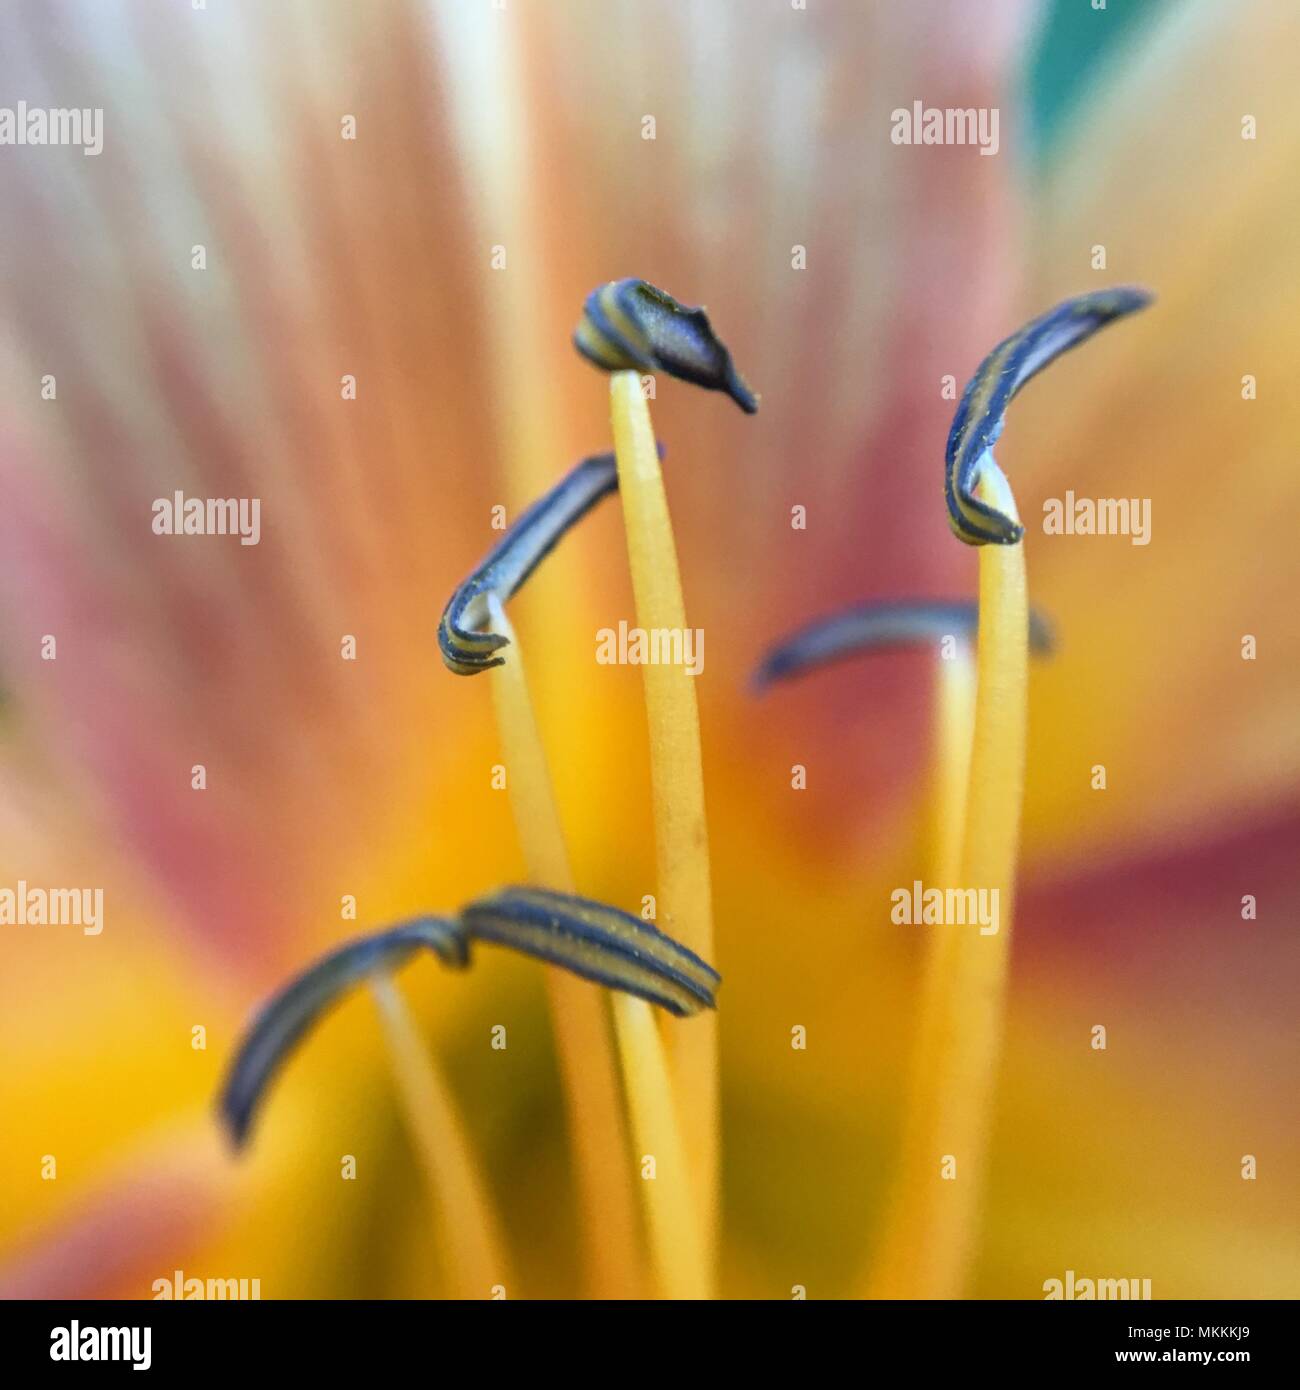 A close up of a yellow and pink day lily flower showing the stamen anther and filament and petals in the background Stock Photo